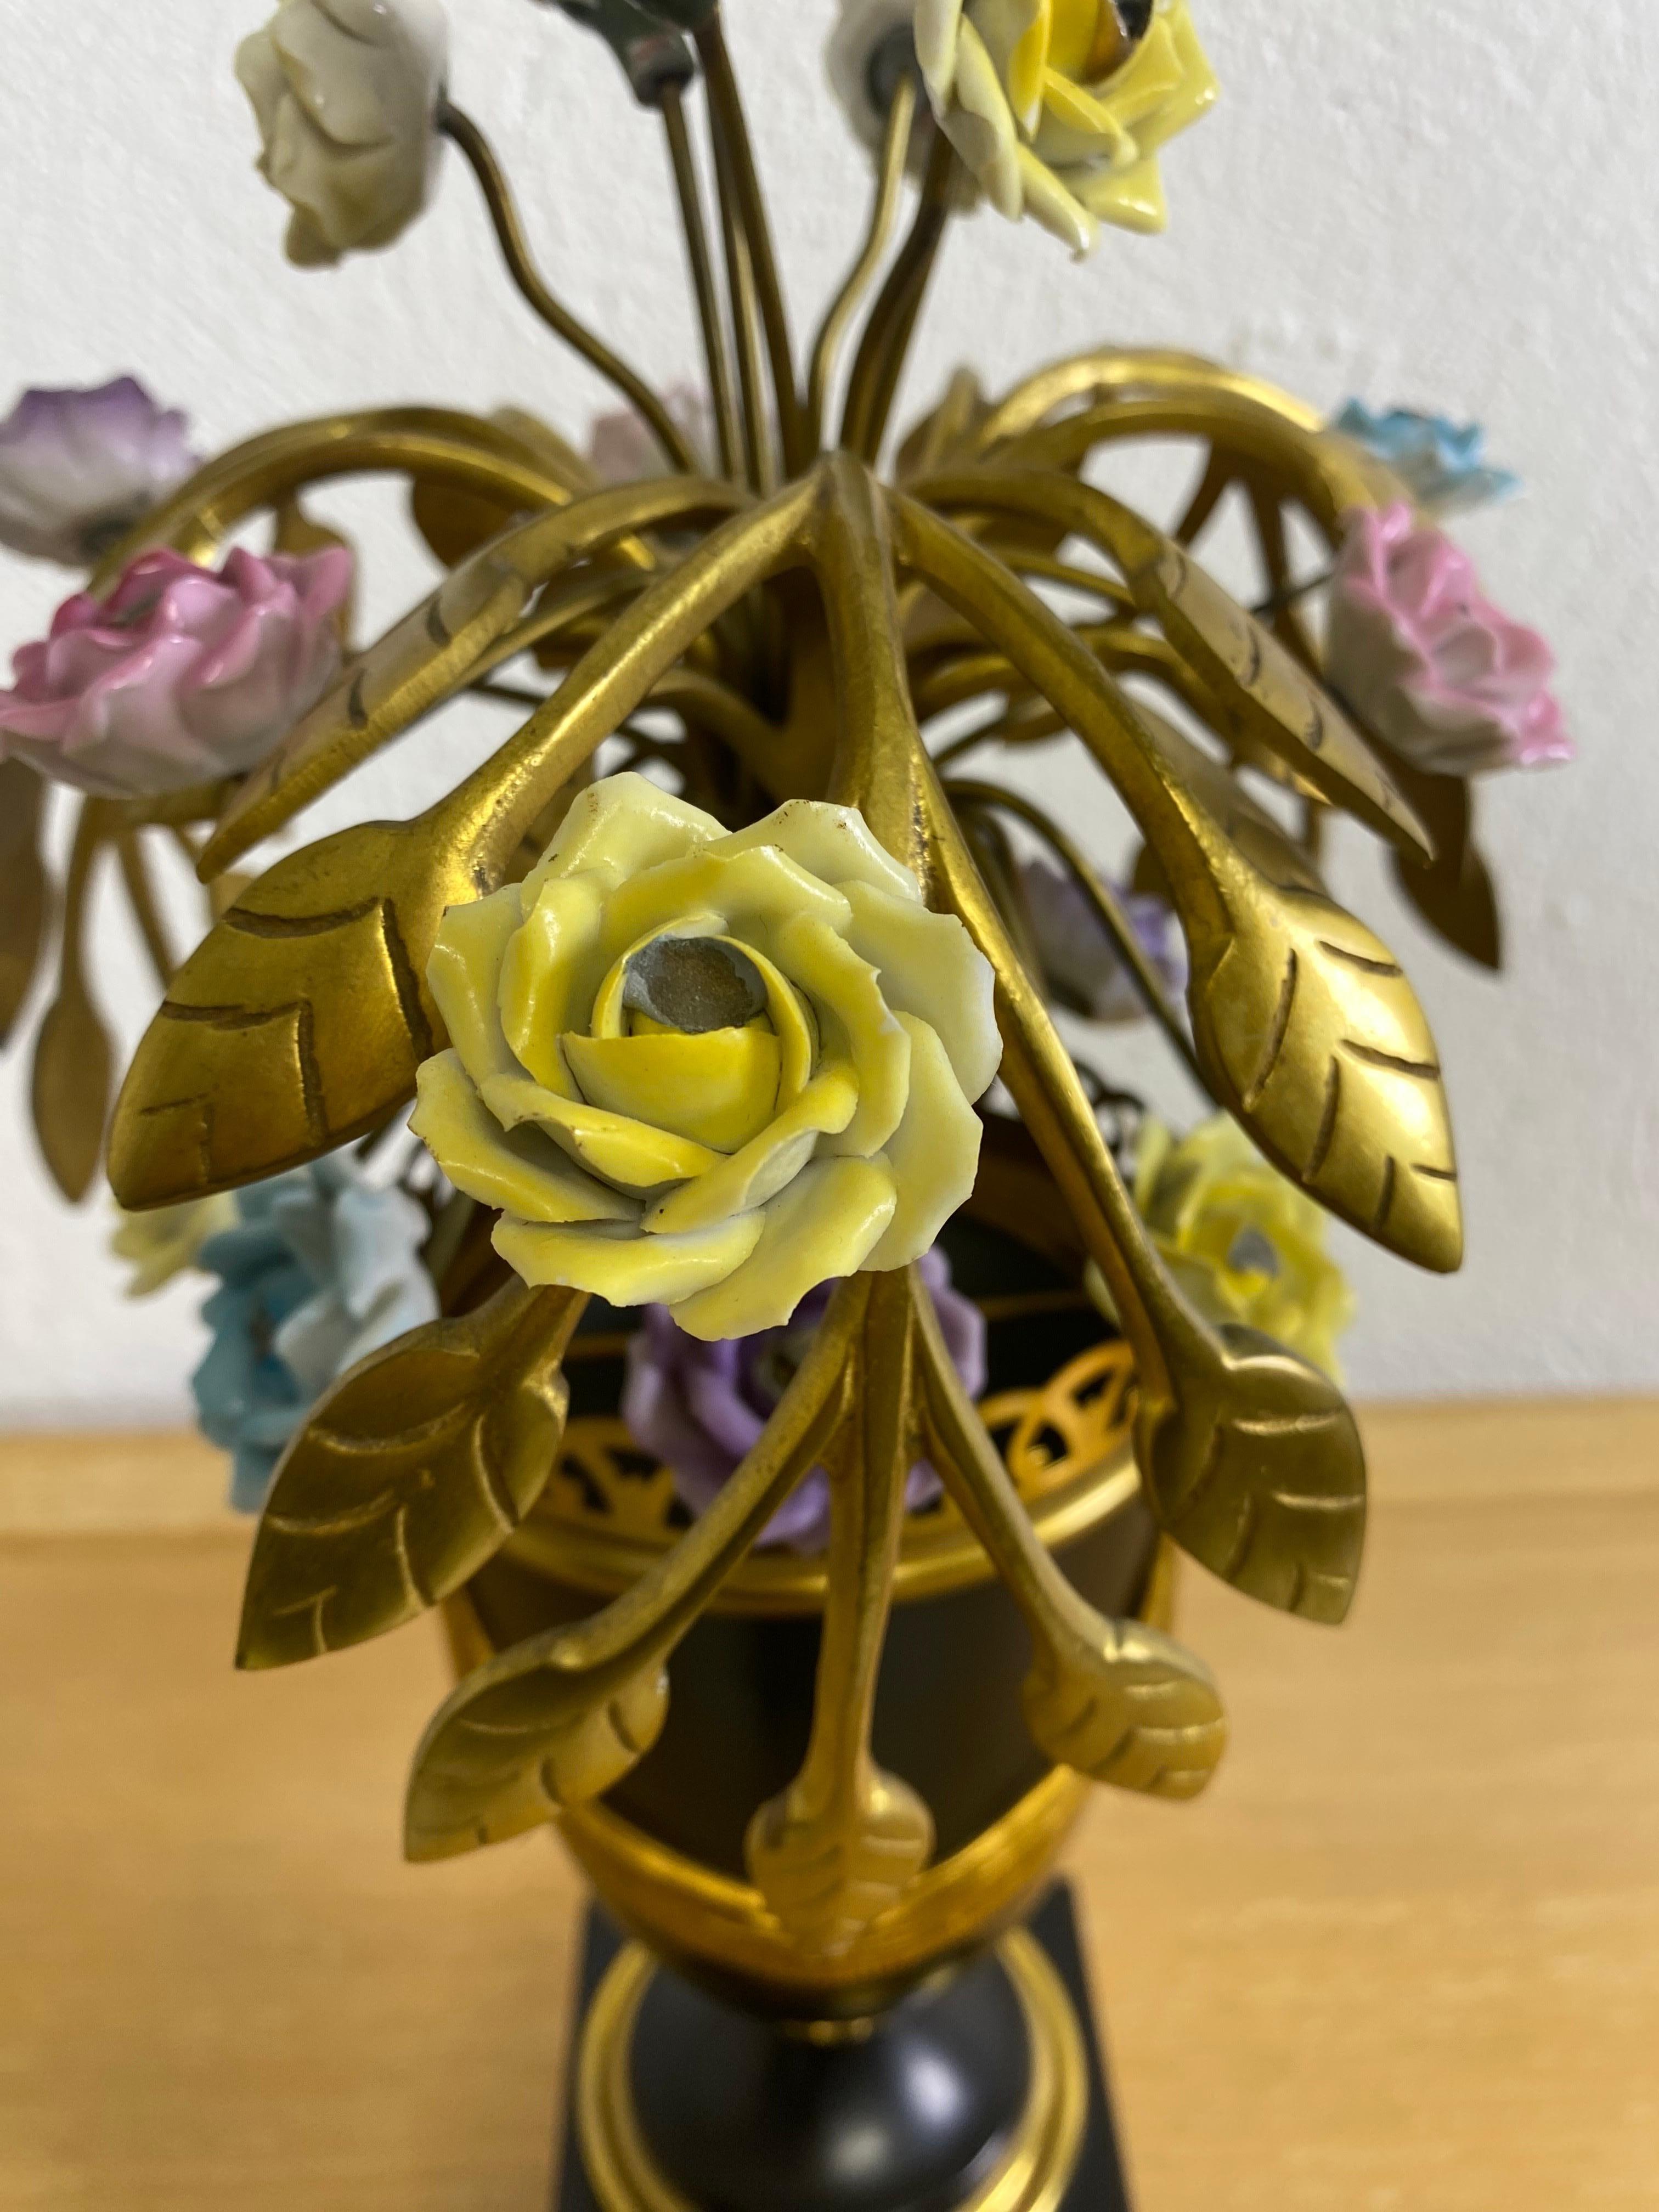 This is a mid-century vintage Italian made decorator table lamp. The table lamp features a botanical inspired bouquet flowers with handmade porcelain flowers nestled in brass leaf design. The base and urn are in black with an empire design featuring